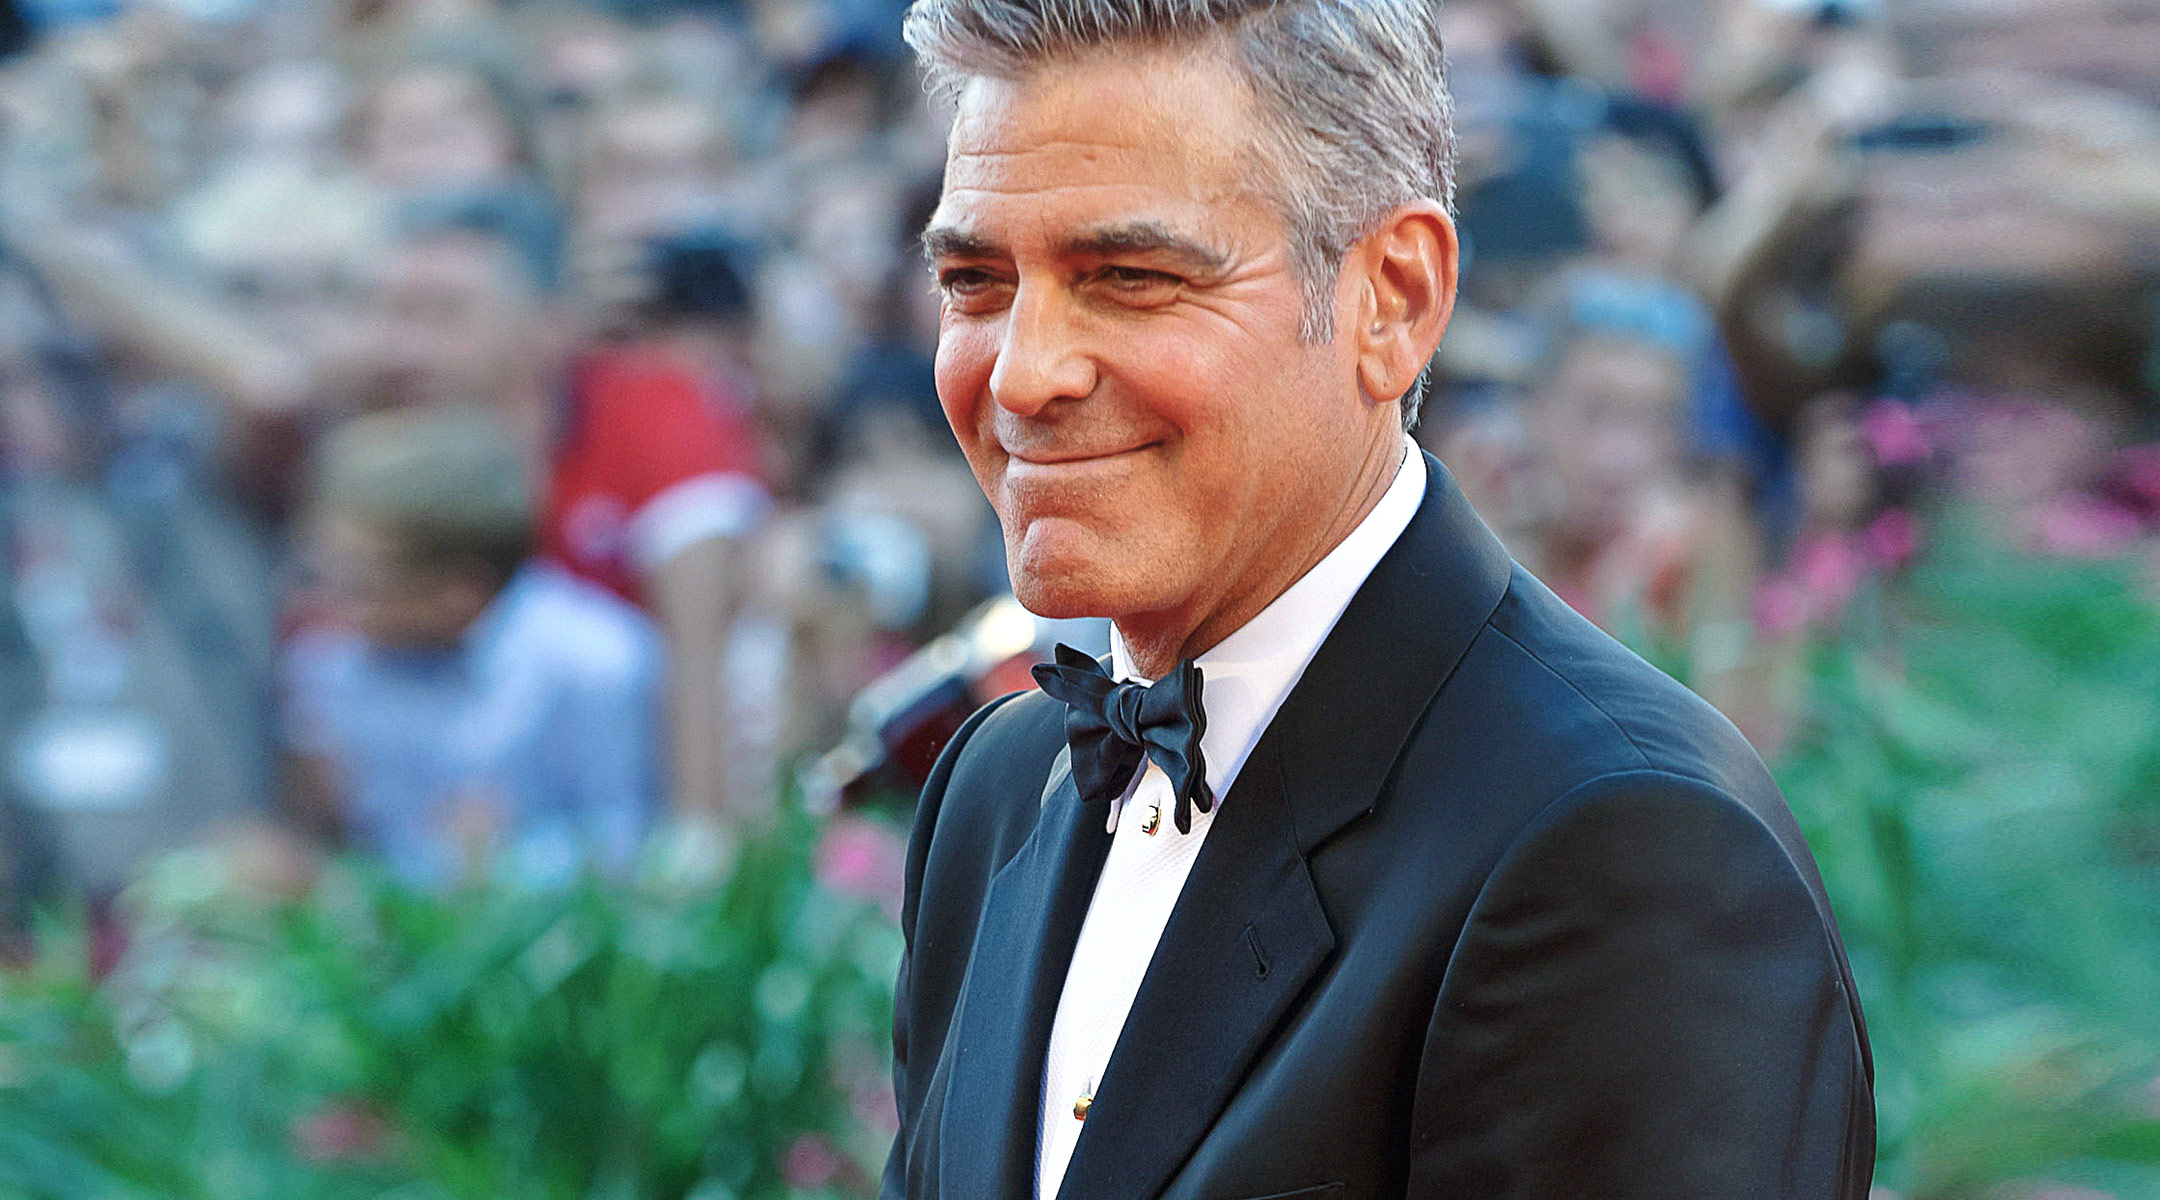 actor george clooney walks the red carpet